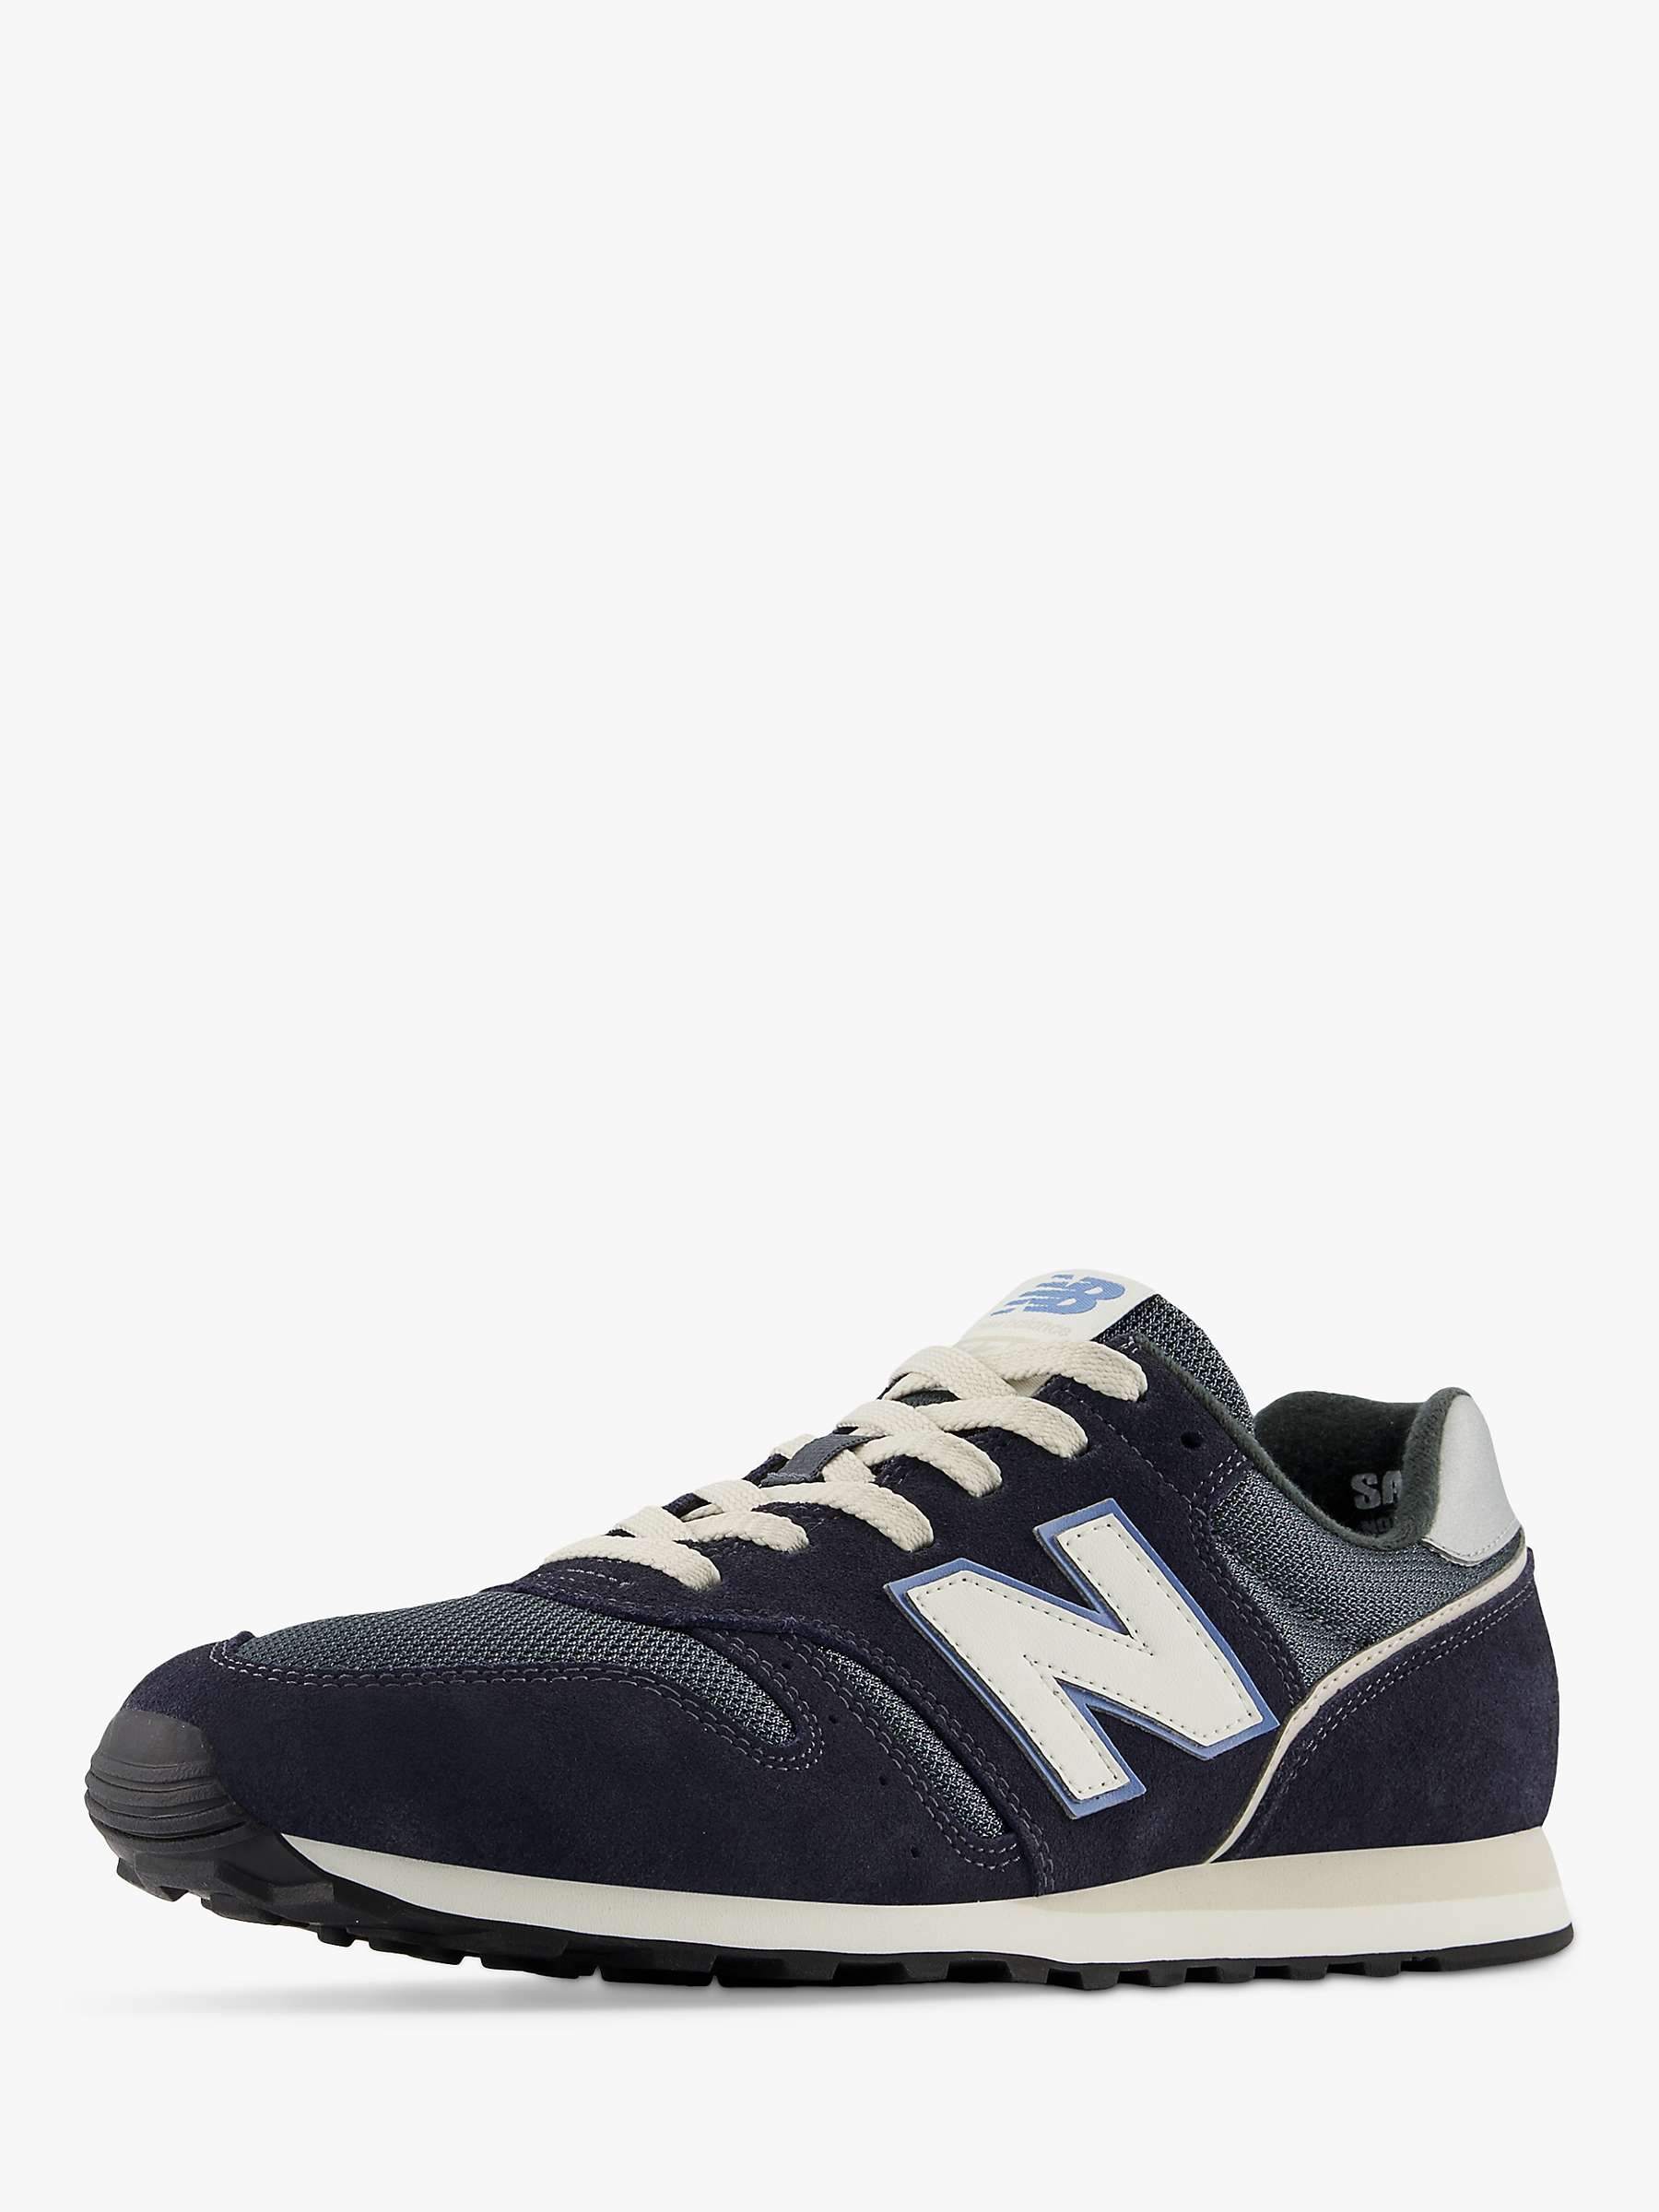 Buy New Balance 373v2 Suede Trainers, Navy Online at johnlewis.com